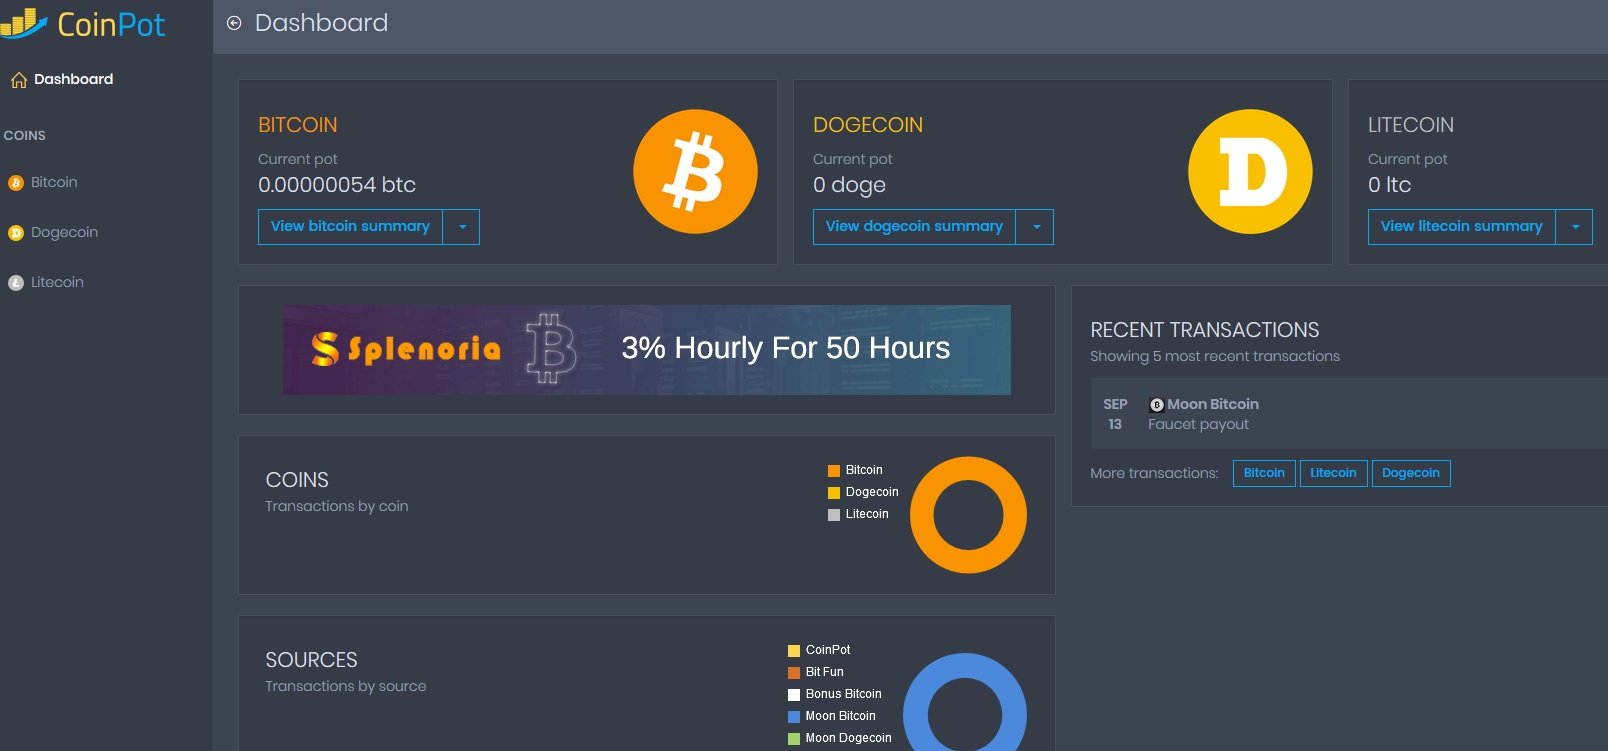 Signup for moonbitcoin litecoin what bitcoin stock to buy